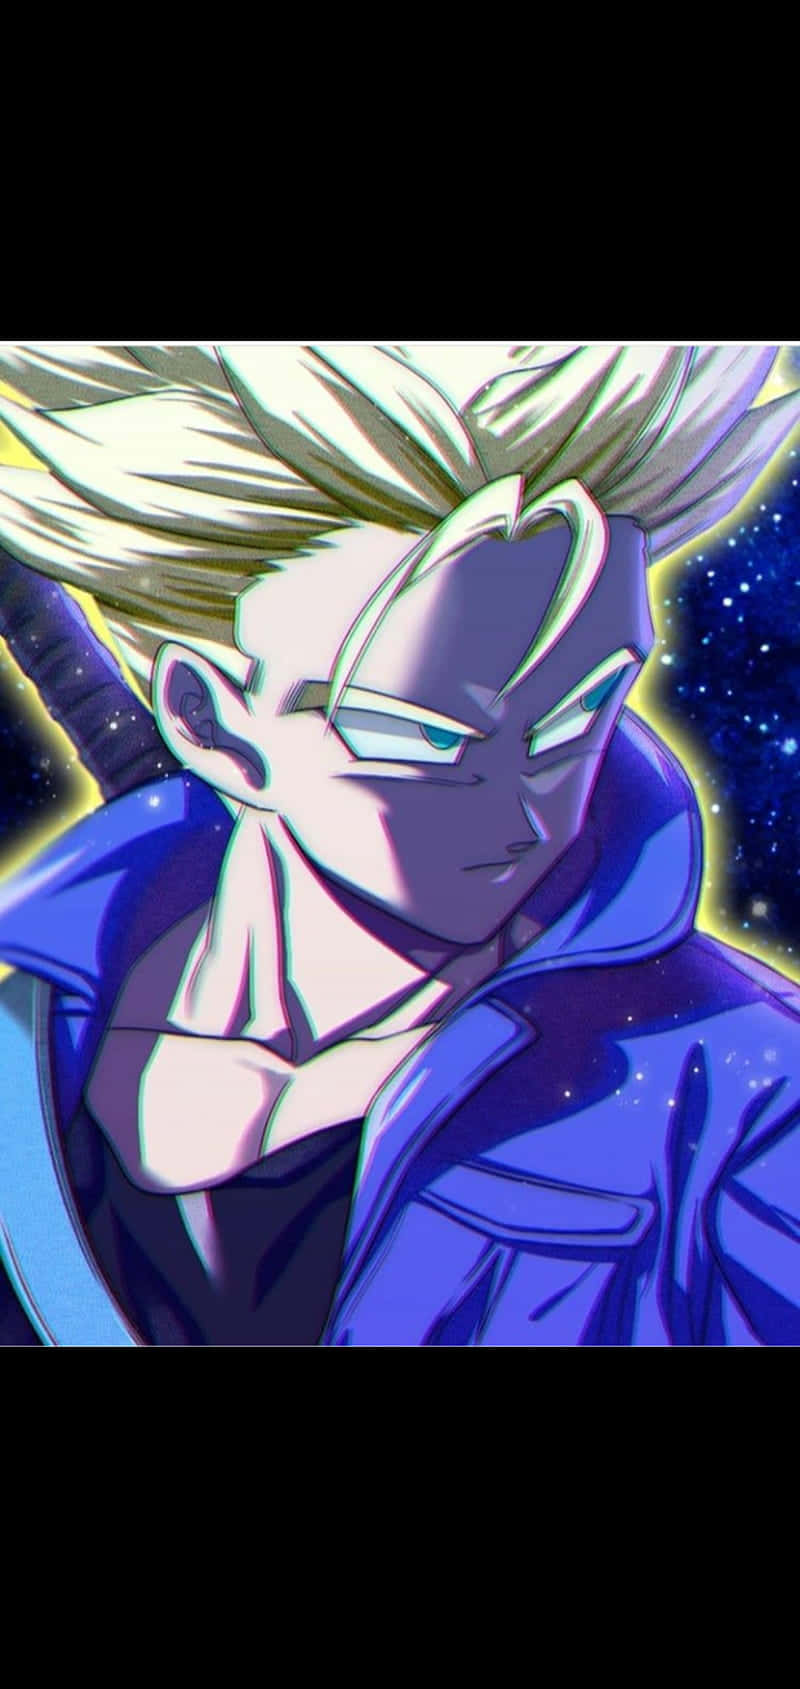 A Dragon Ball Character With Blonde Hair Wallpaper